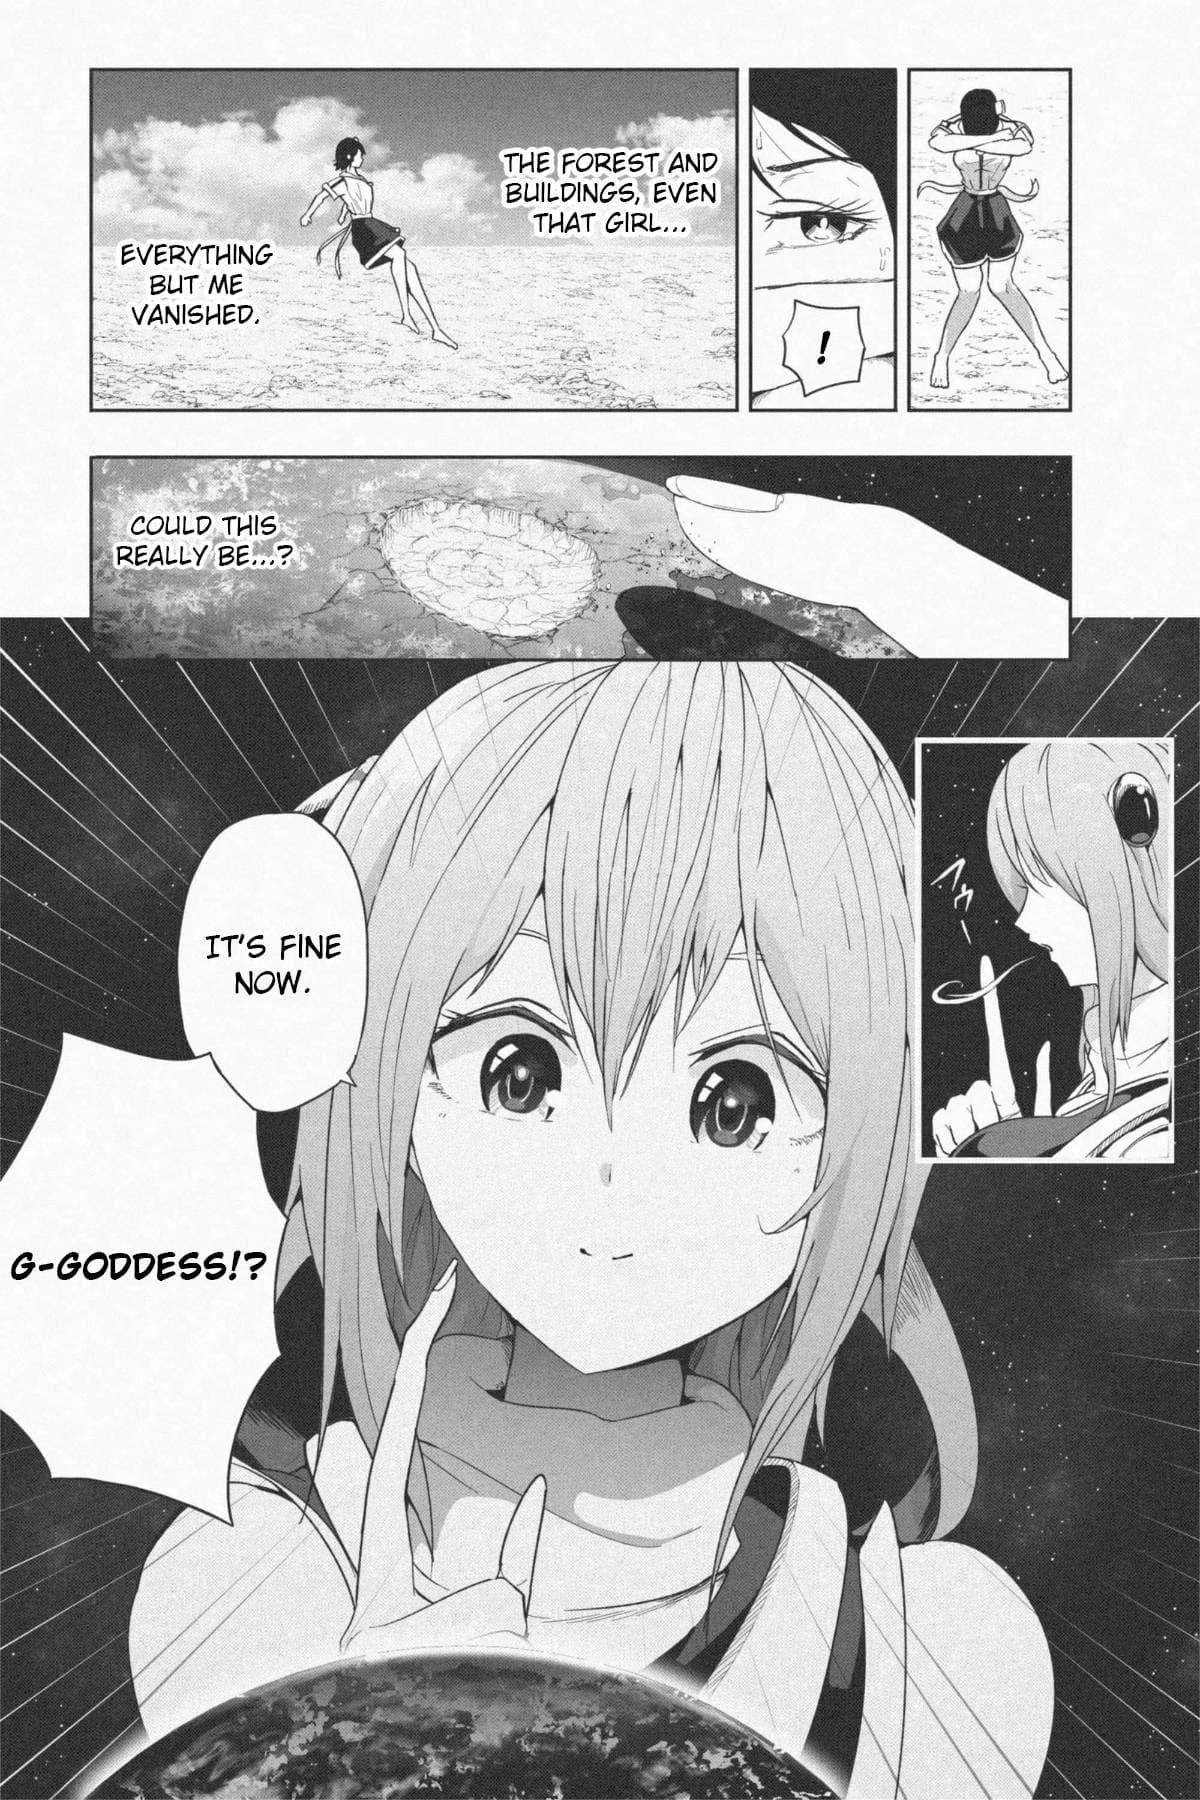 Teasing NEW Chikyuu de Asobo - NEW Play with earth - Original Hard Core Sex - Page 6